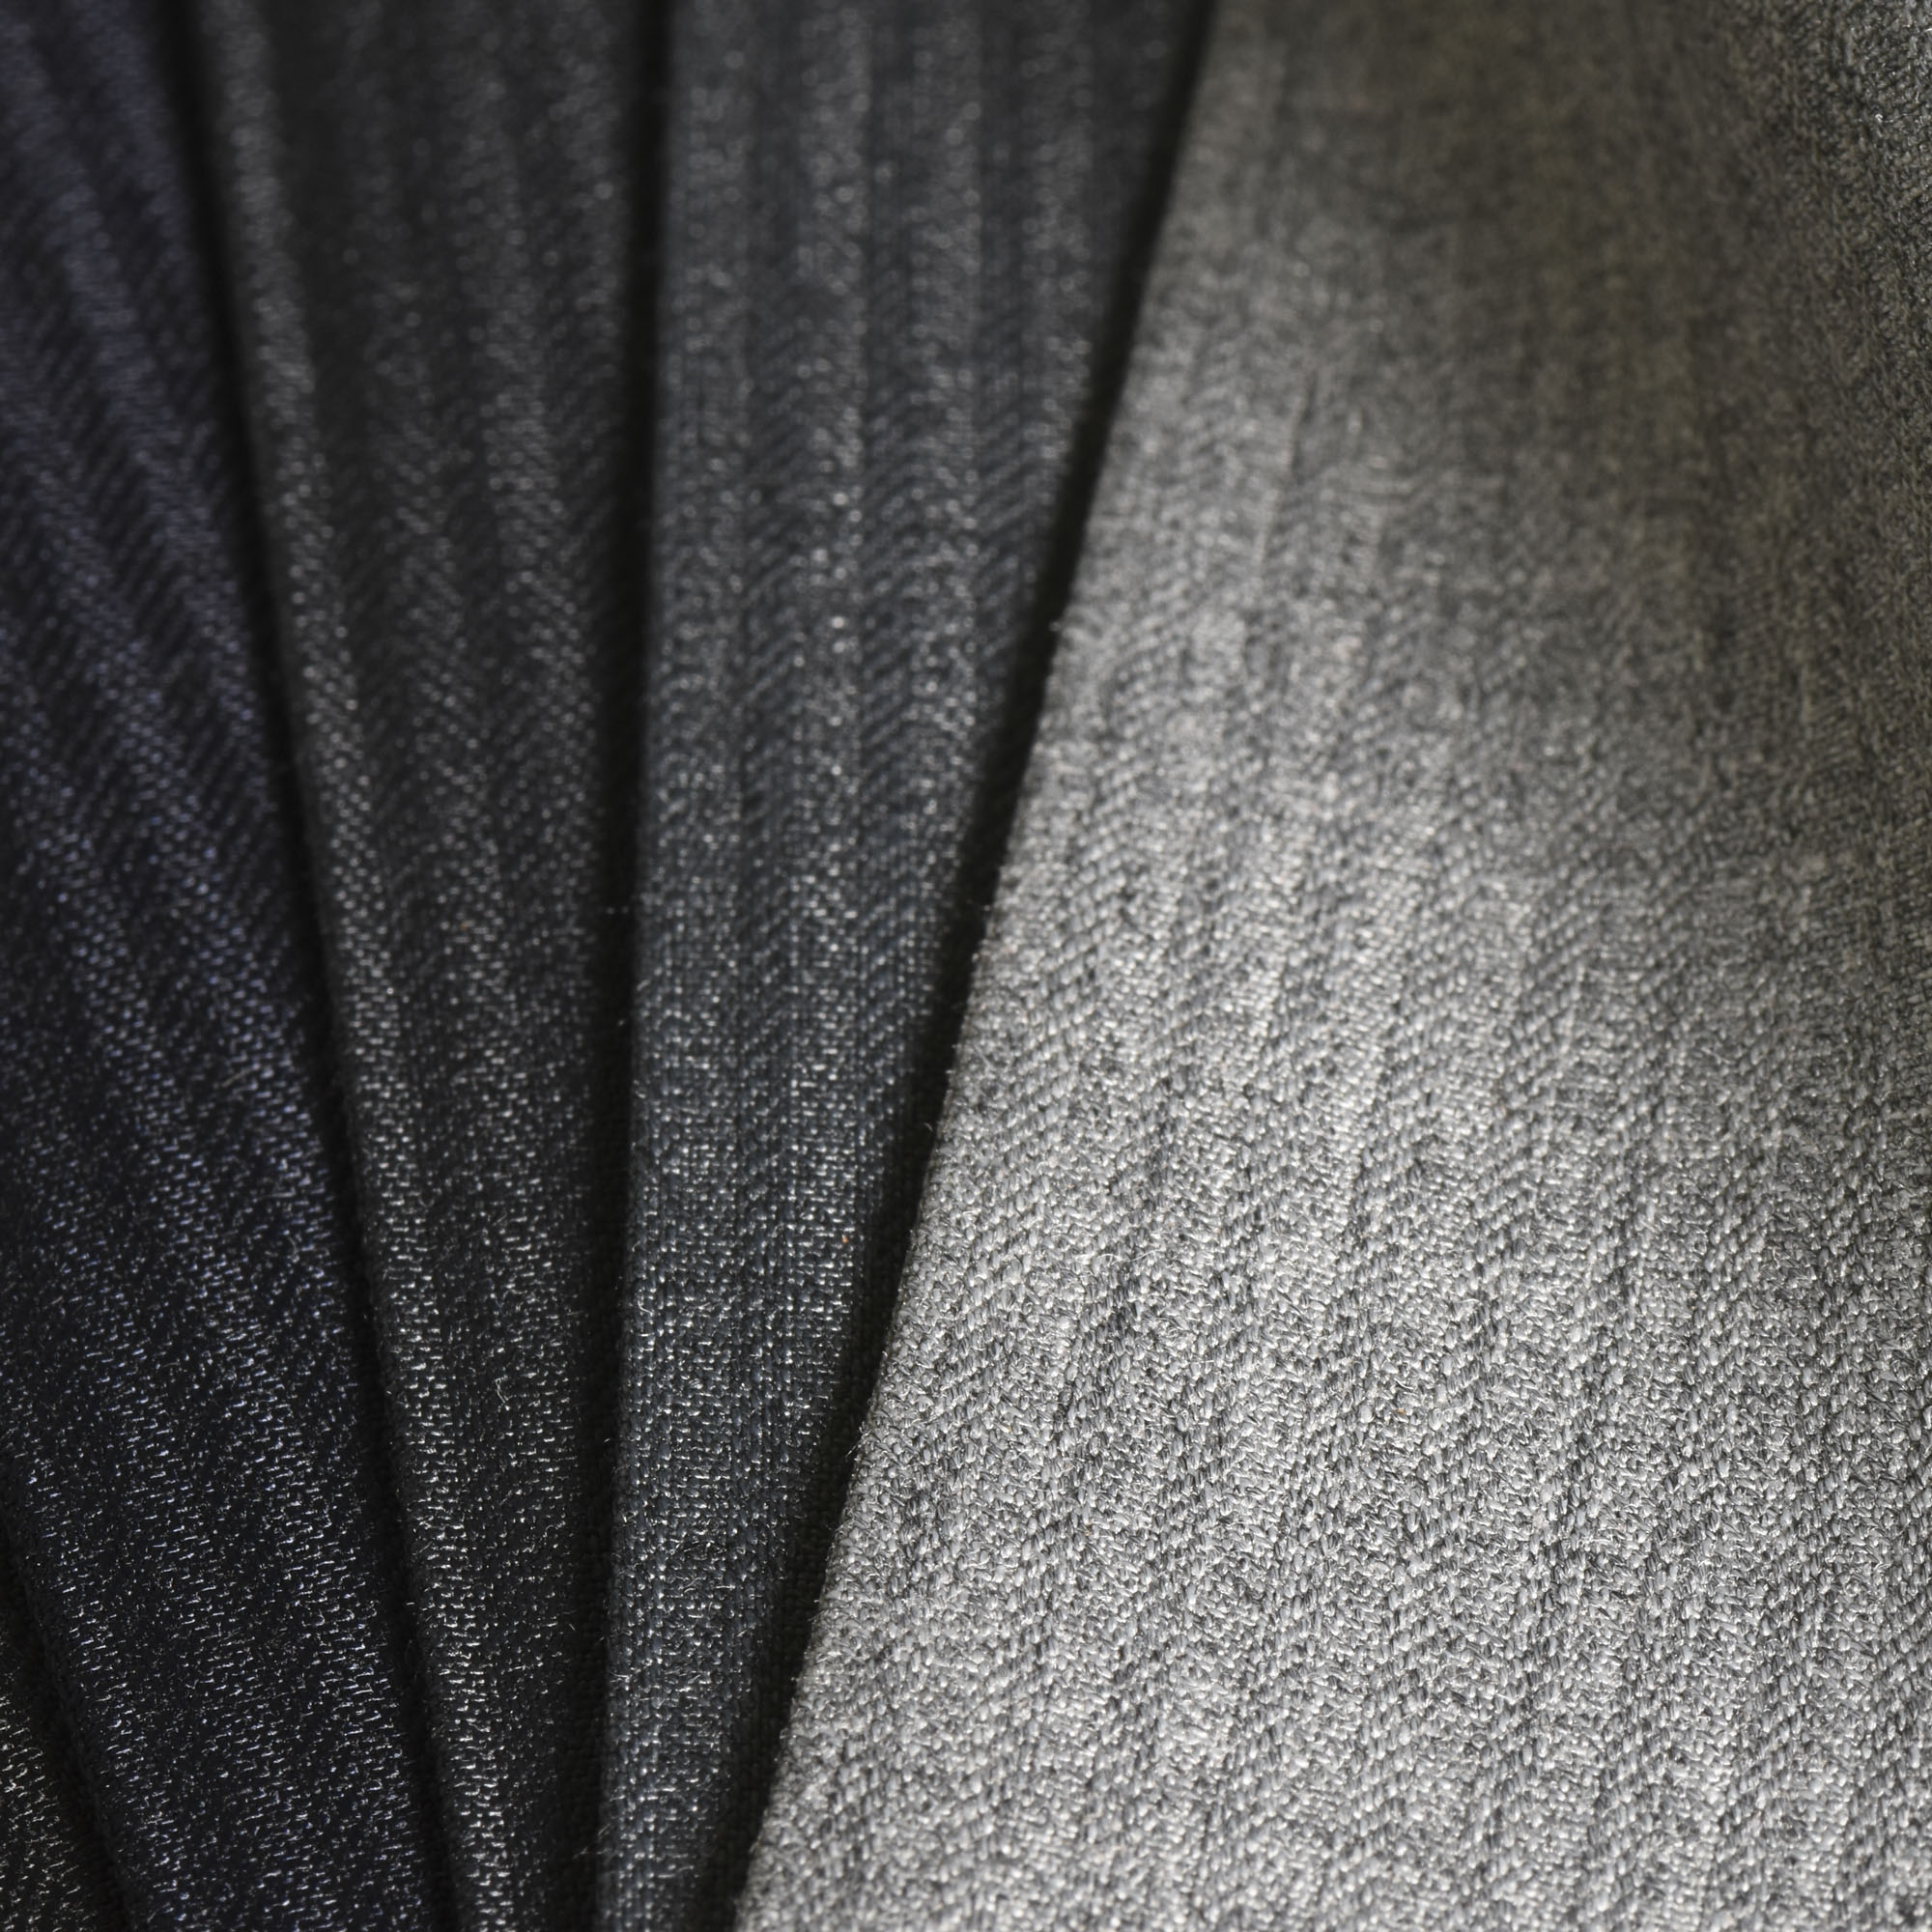 Italia Wool Mix SB Series for Formal Suiting Wear | Wool Collection of ...